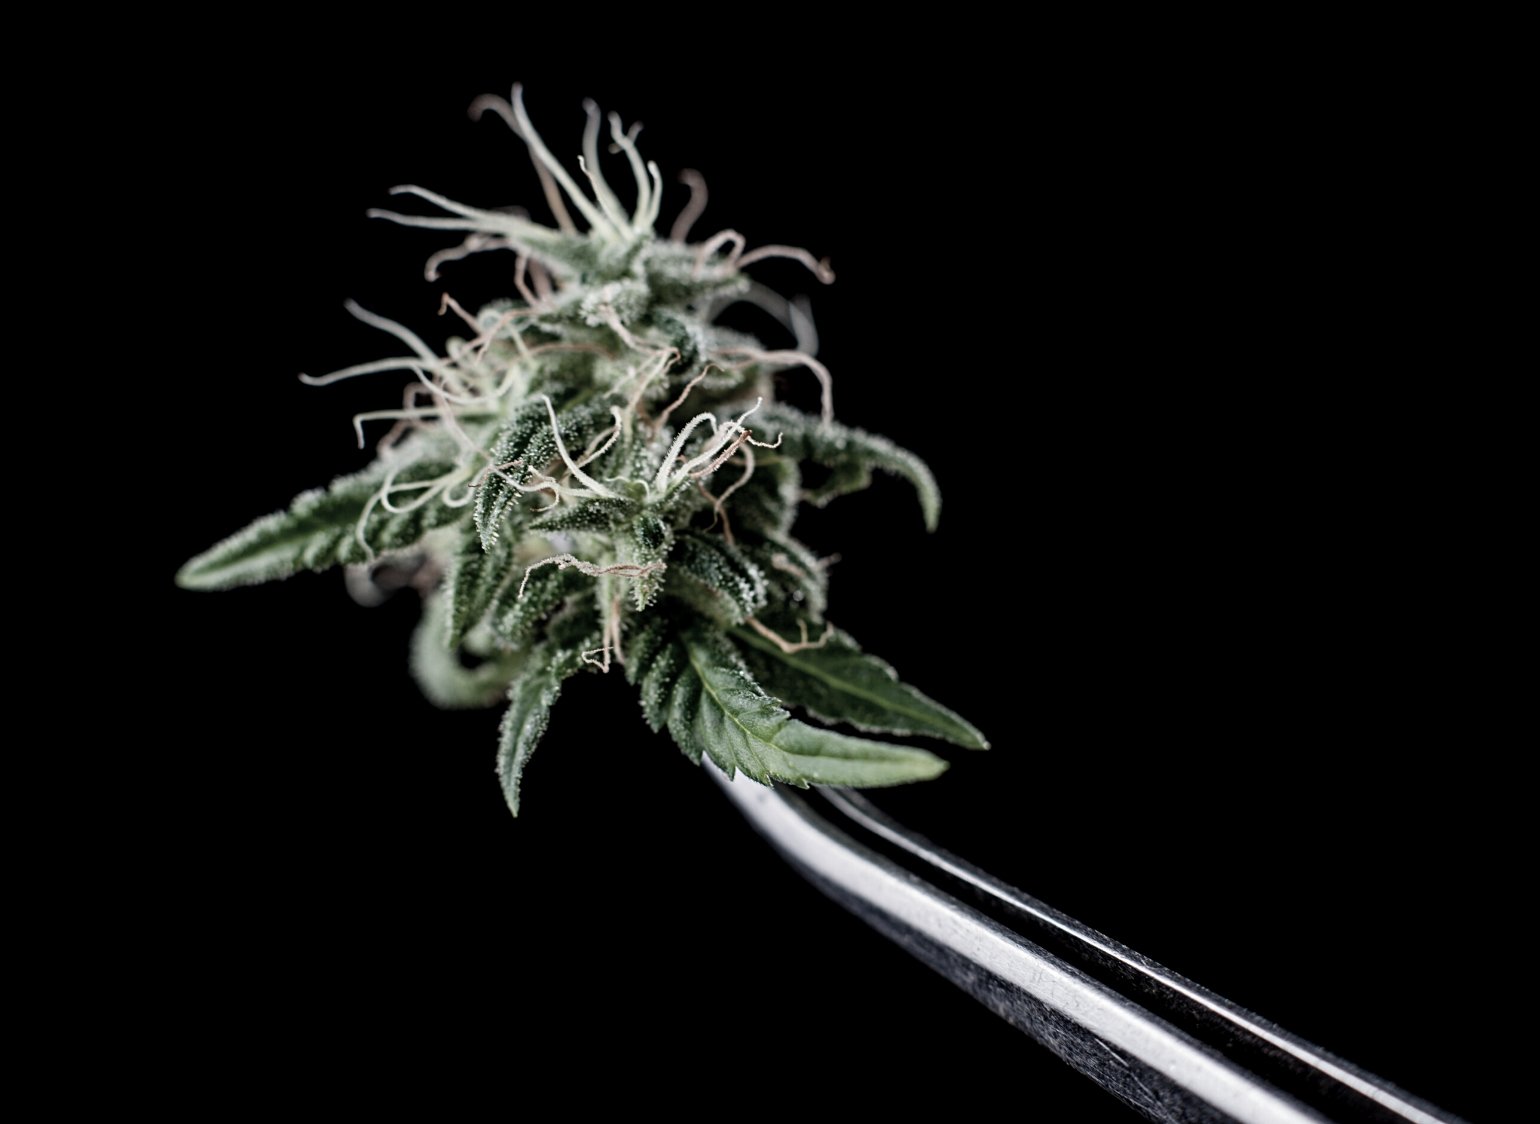 Delve into the world of THC potency and gain a deeper understanding of cannabis strength. Learn about tetrahydrocannabinol (THC), the primary psychoactive compound in cannabis, and how its potency is measured.